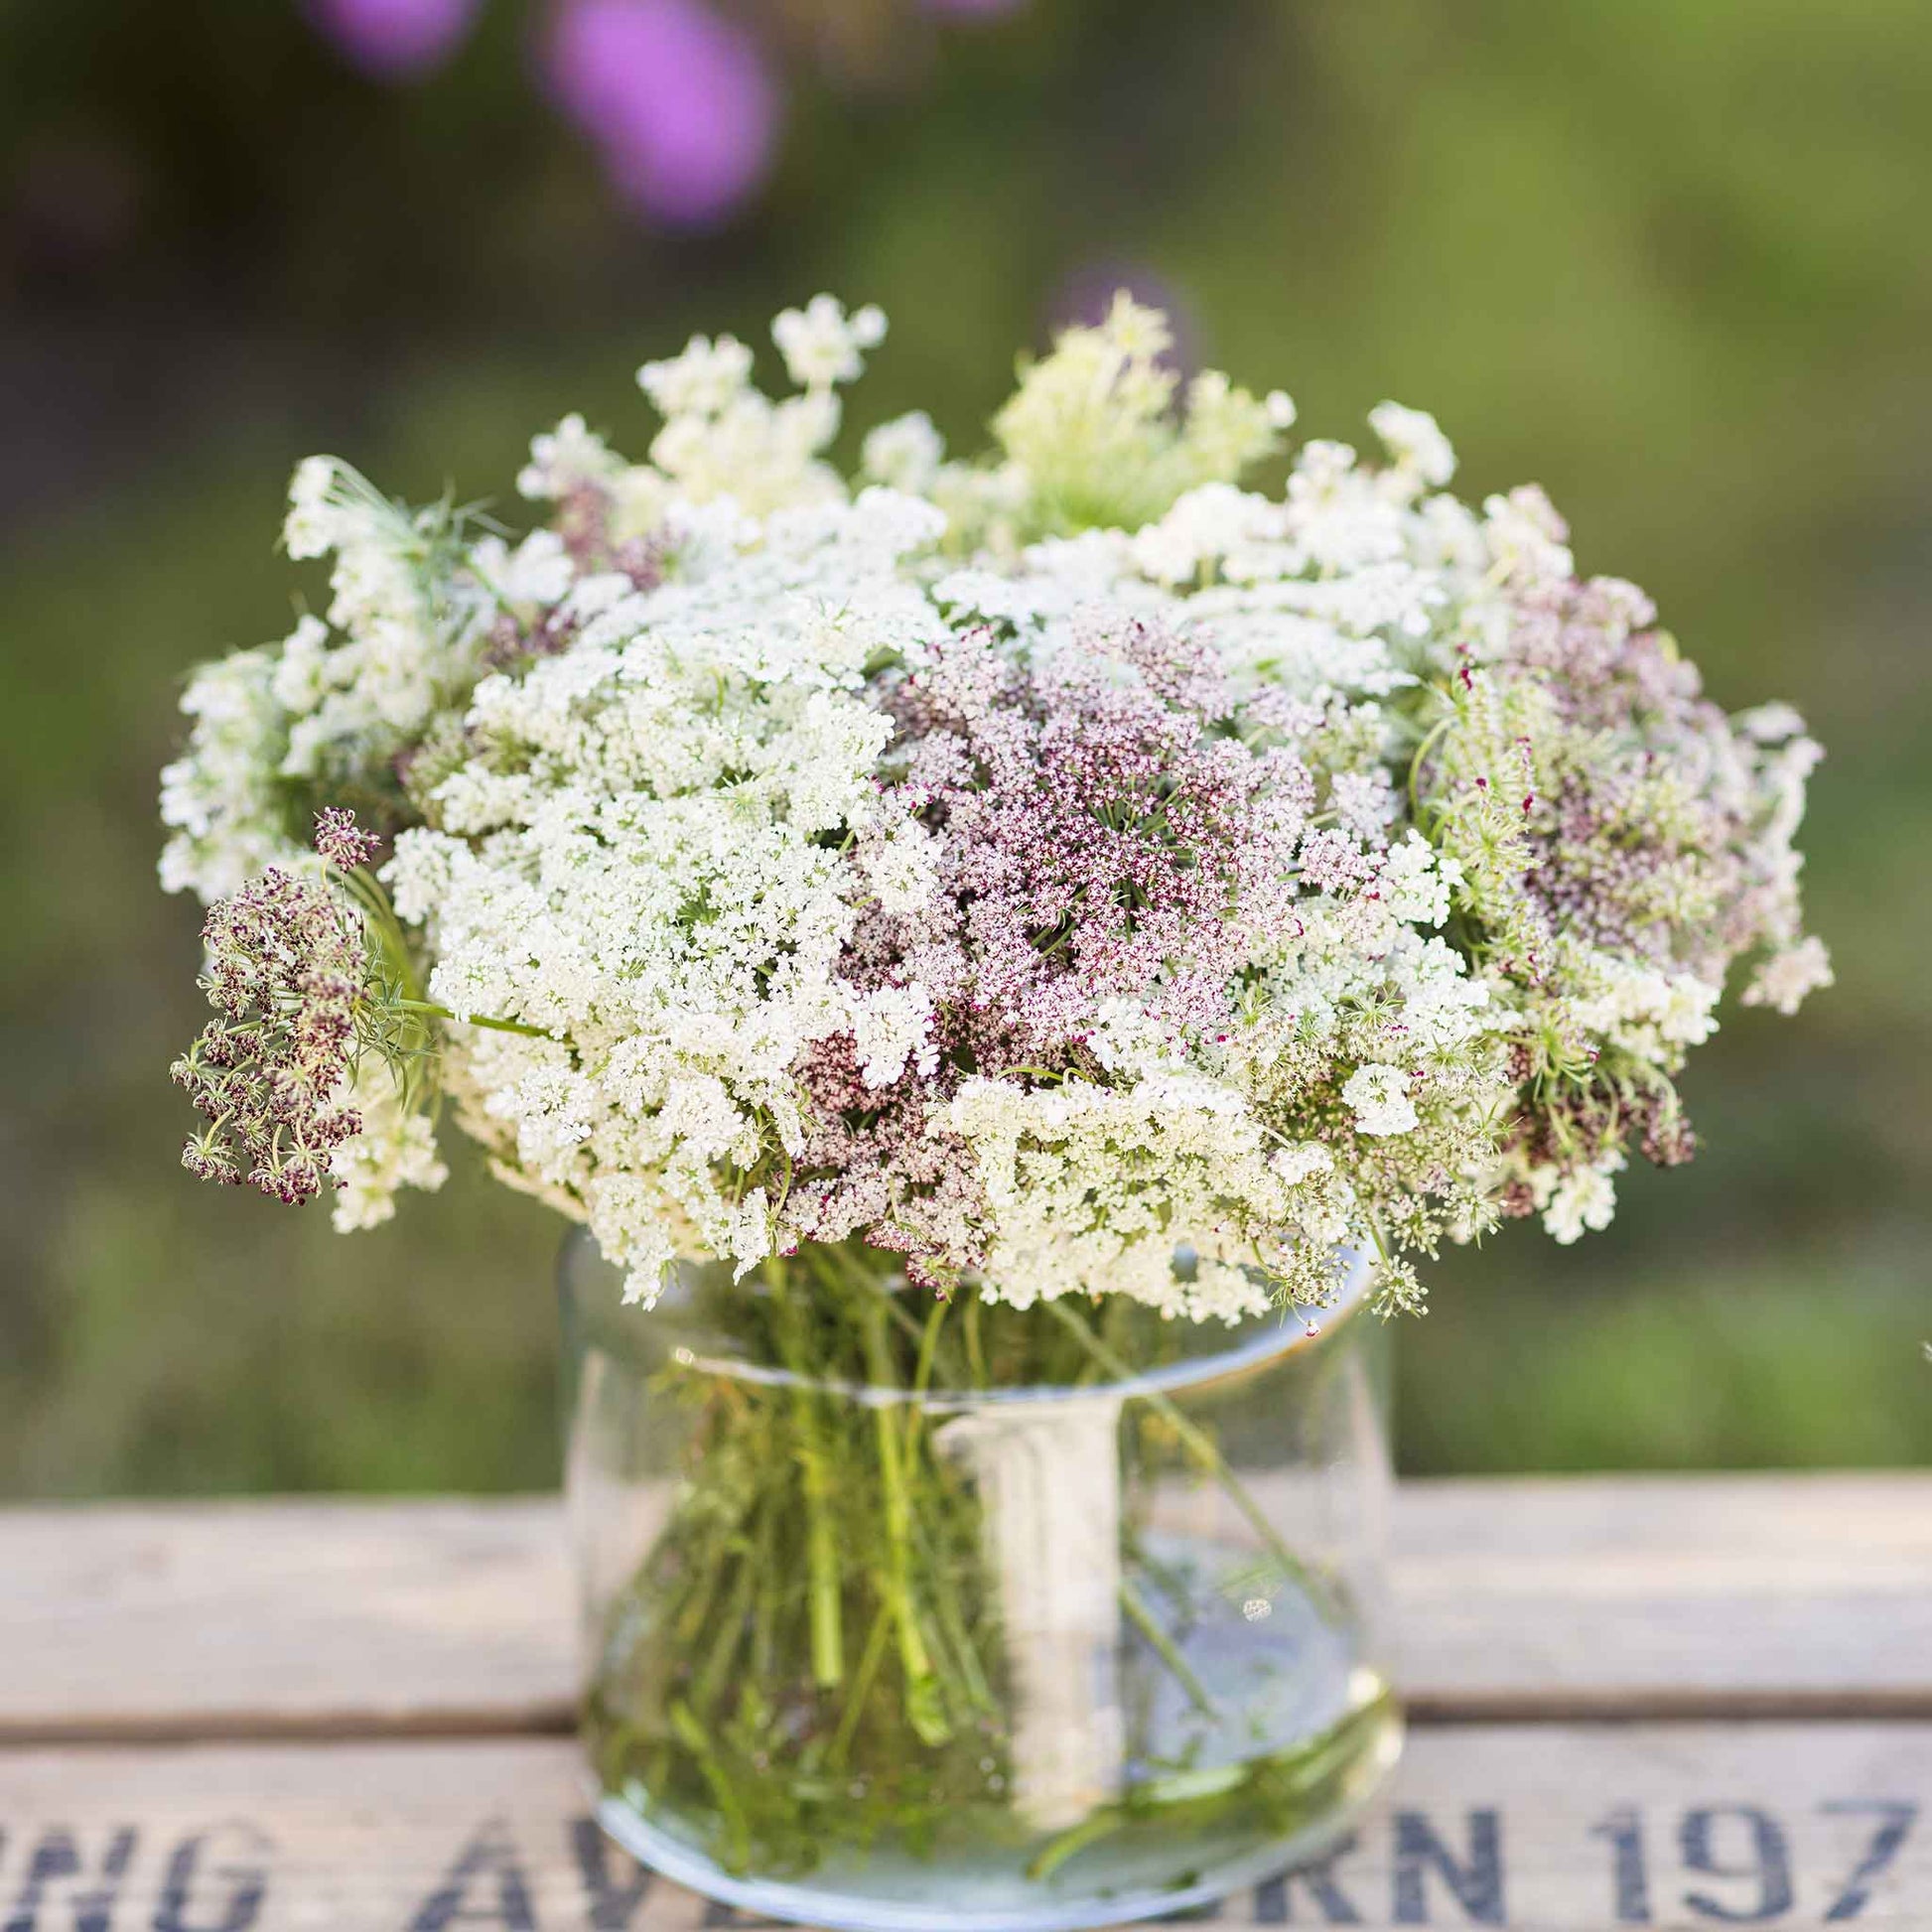 Queen Anne's Lace Seeds - Chocolate Lace Flower